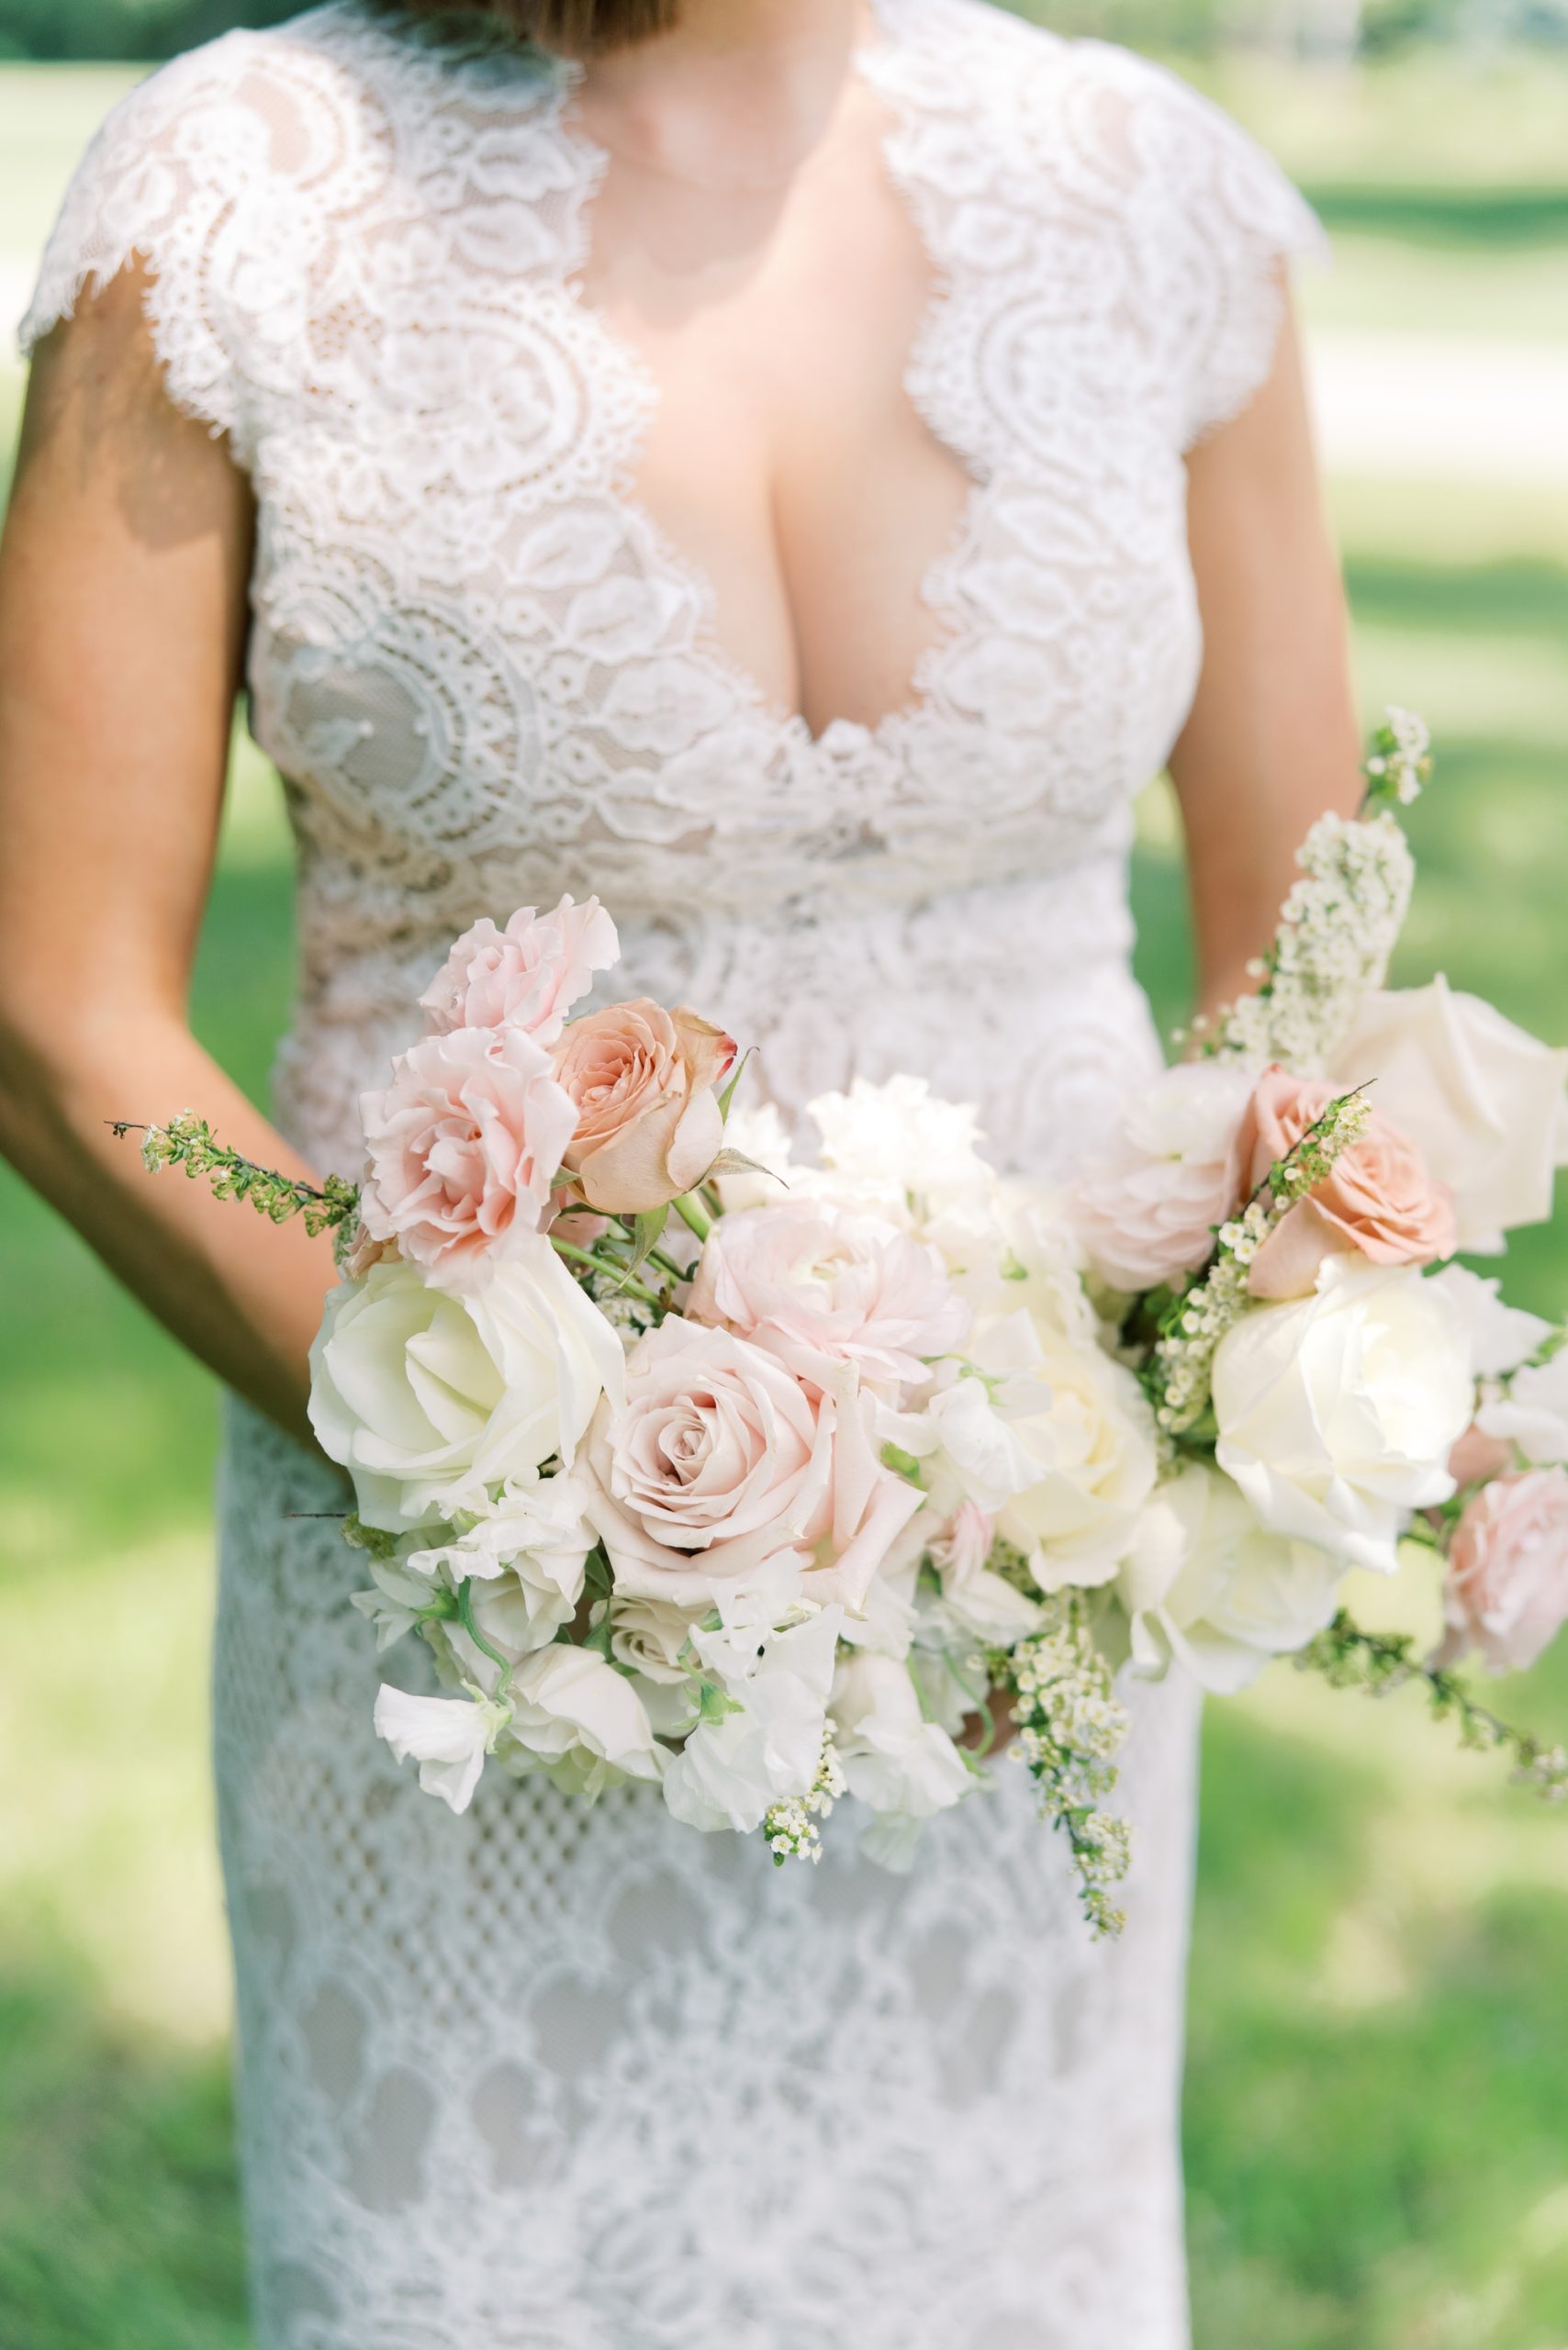 the bride wore a BHLDN lace wedding dress